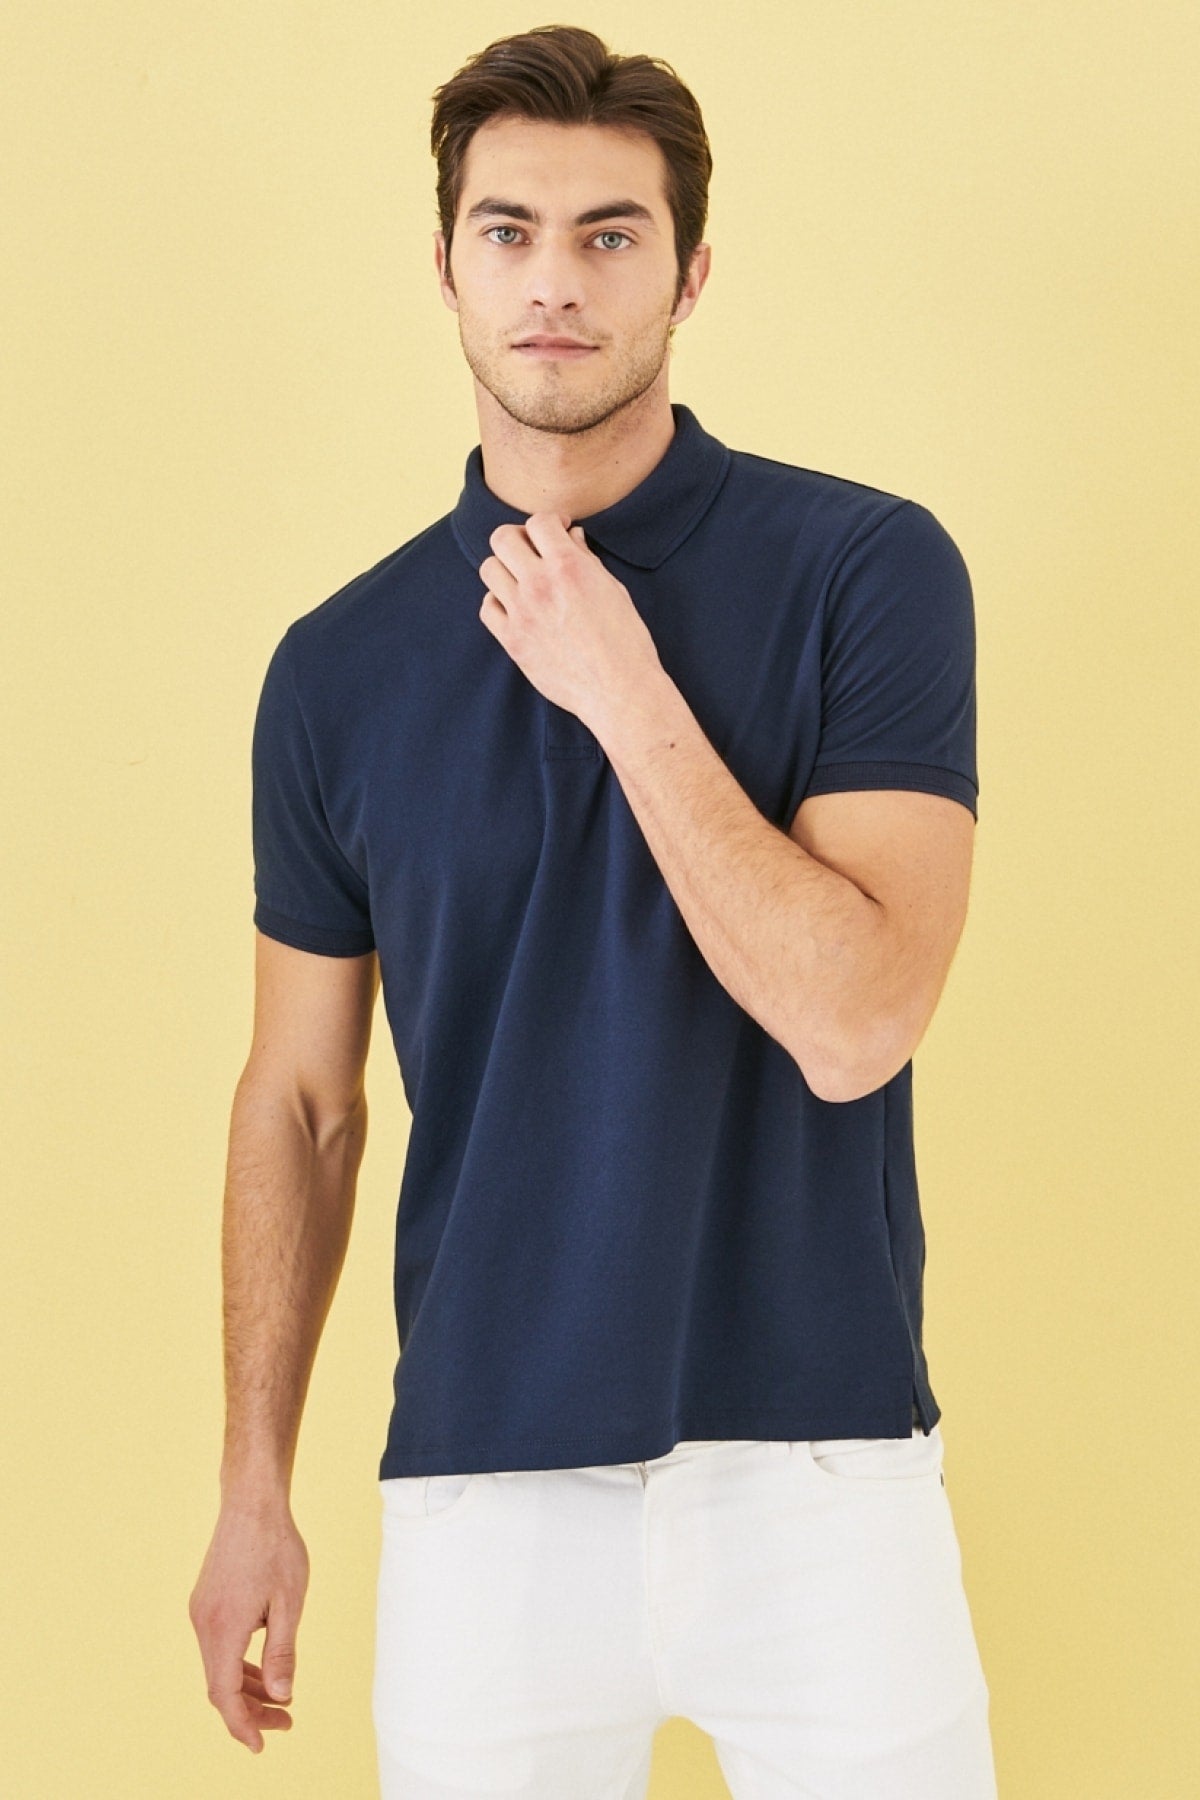 Men's Non-Shrink Cotton Fabric Slim Fit Slim Fit Navy Blue Roll-Up Polo Neck T-Shirt